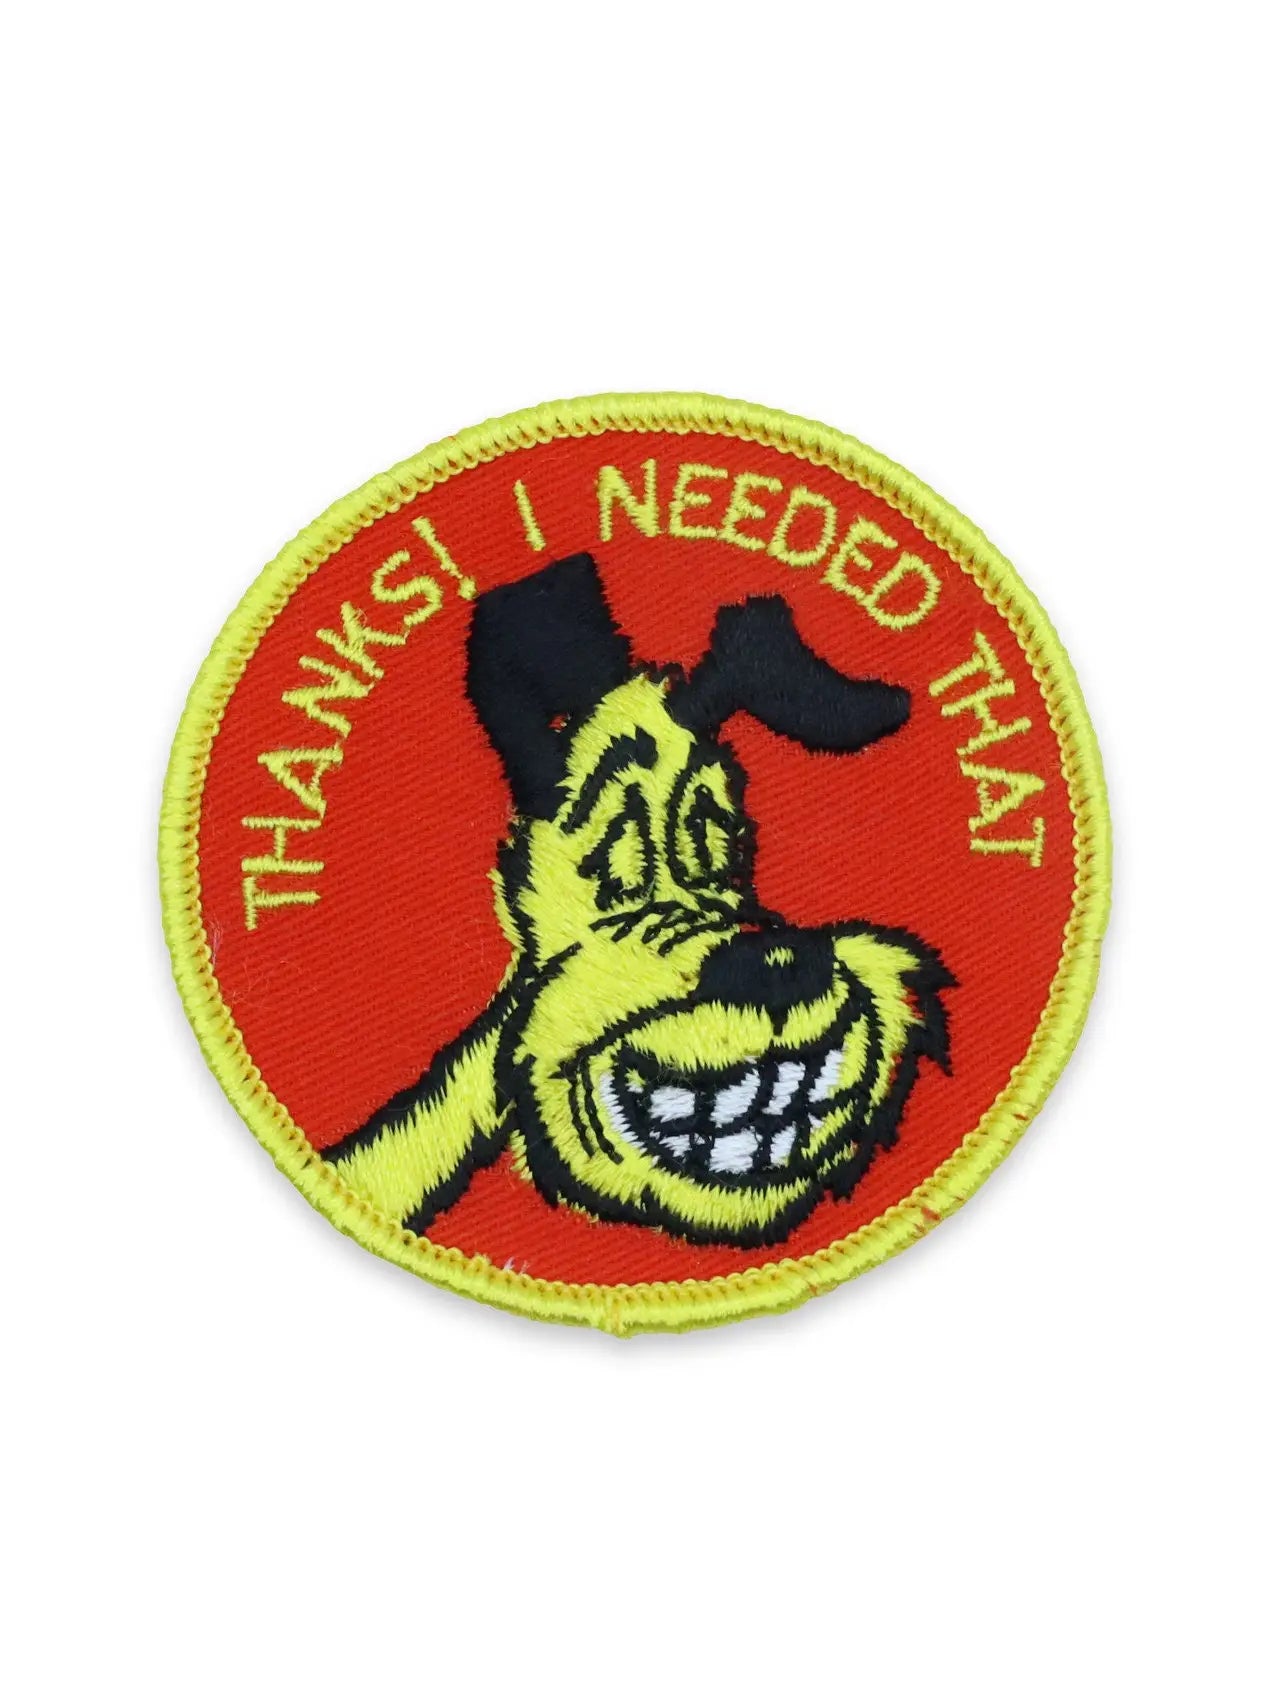 Deadstock round embroidered patch with an illustration of a smiling cartoon dog and the caption “THANKS! I NEEDED THAT” on a red background with yellow type